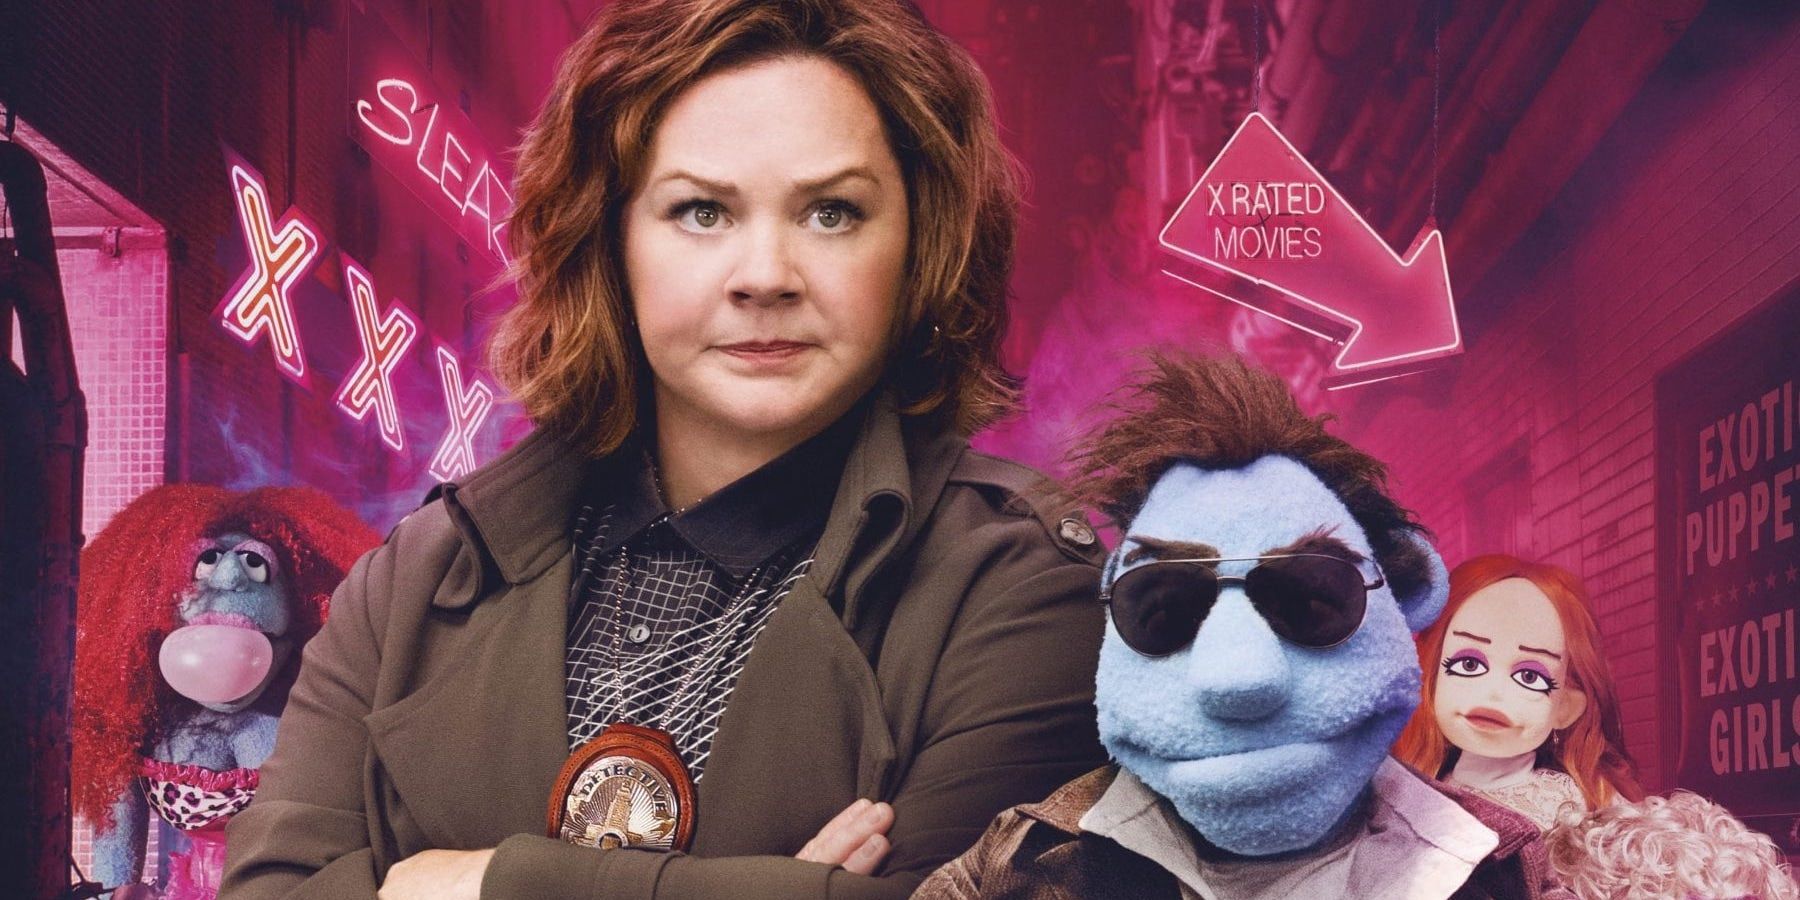 Does The Happytime Murders Have A Post-Credits Scene?